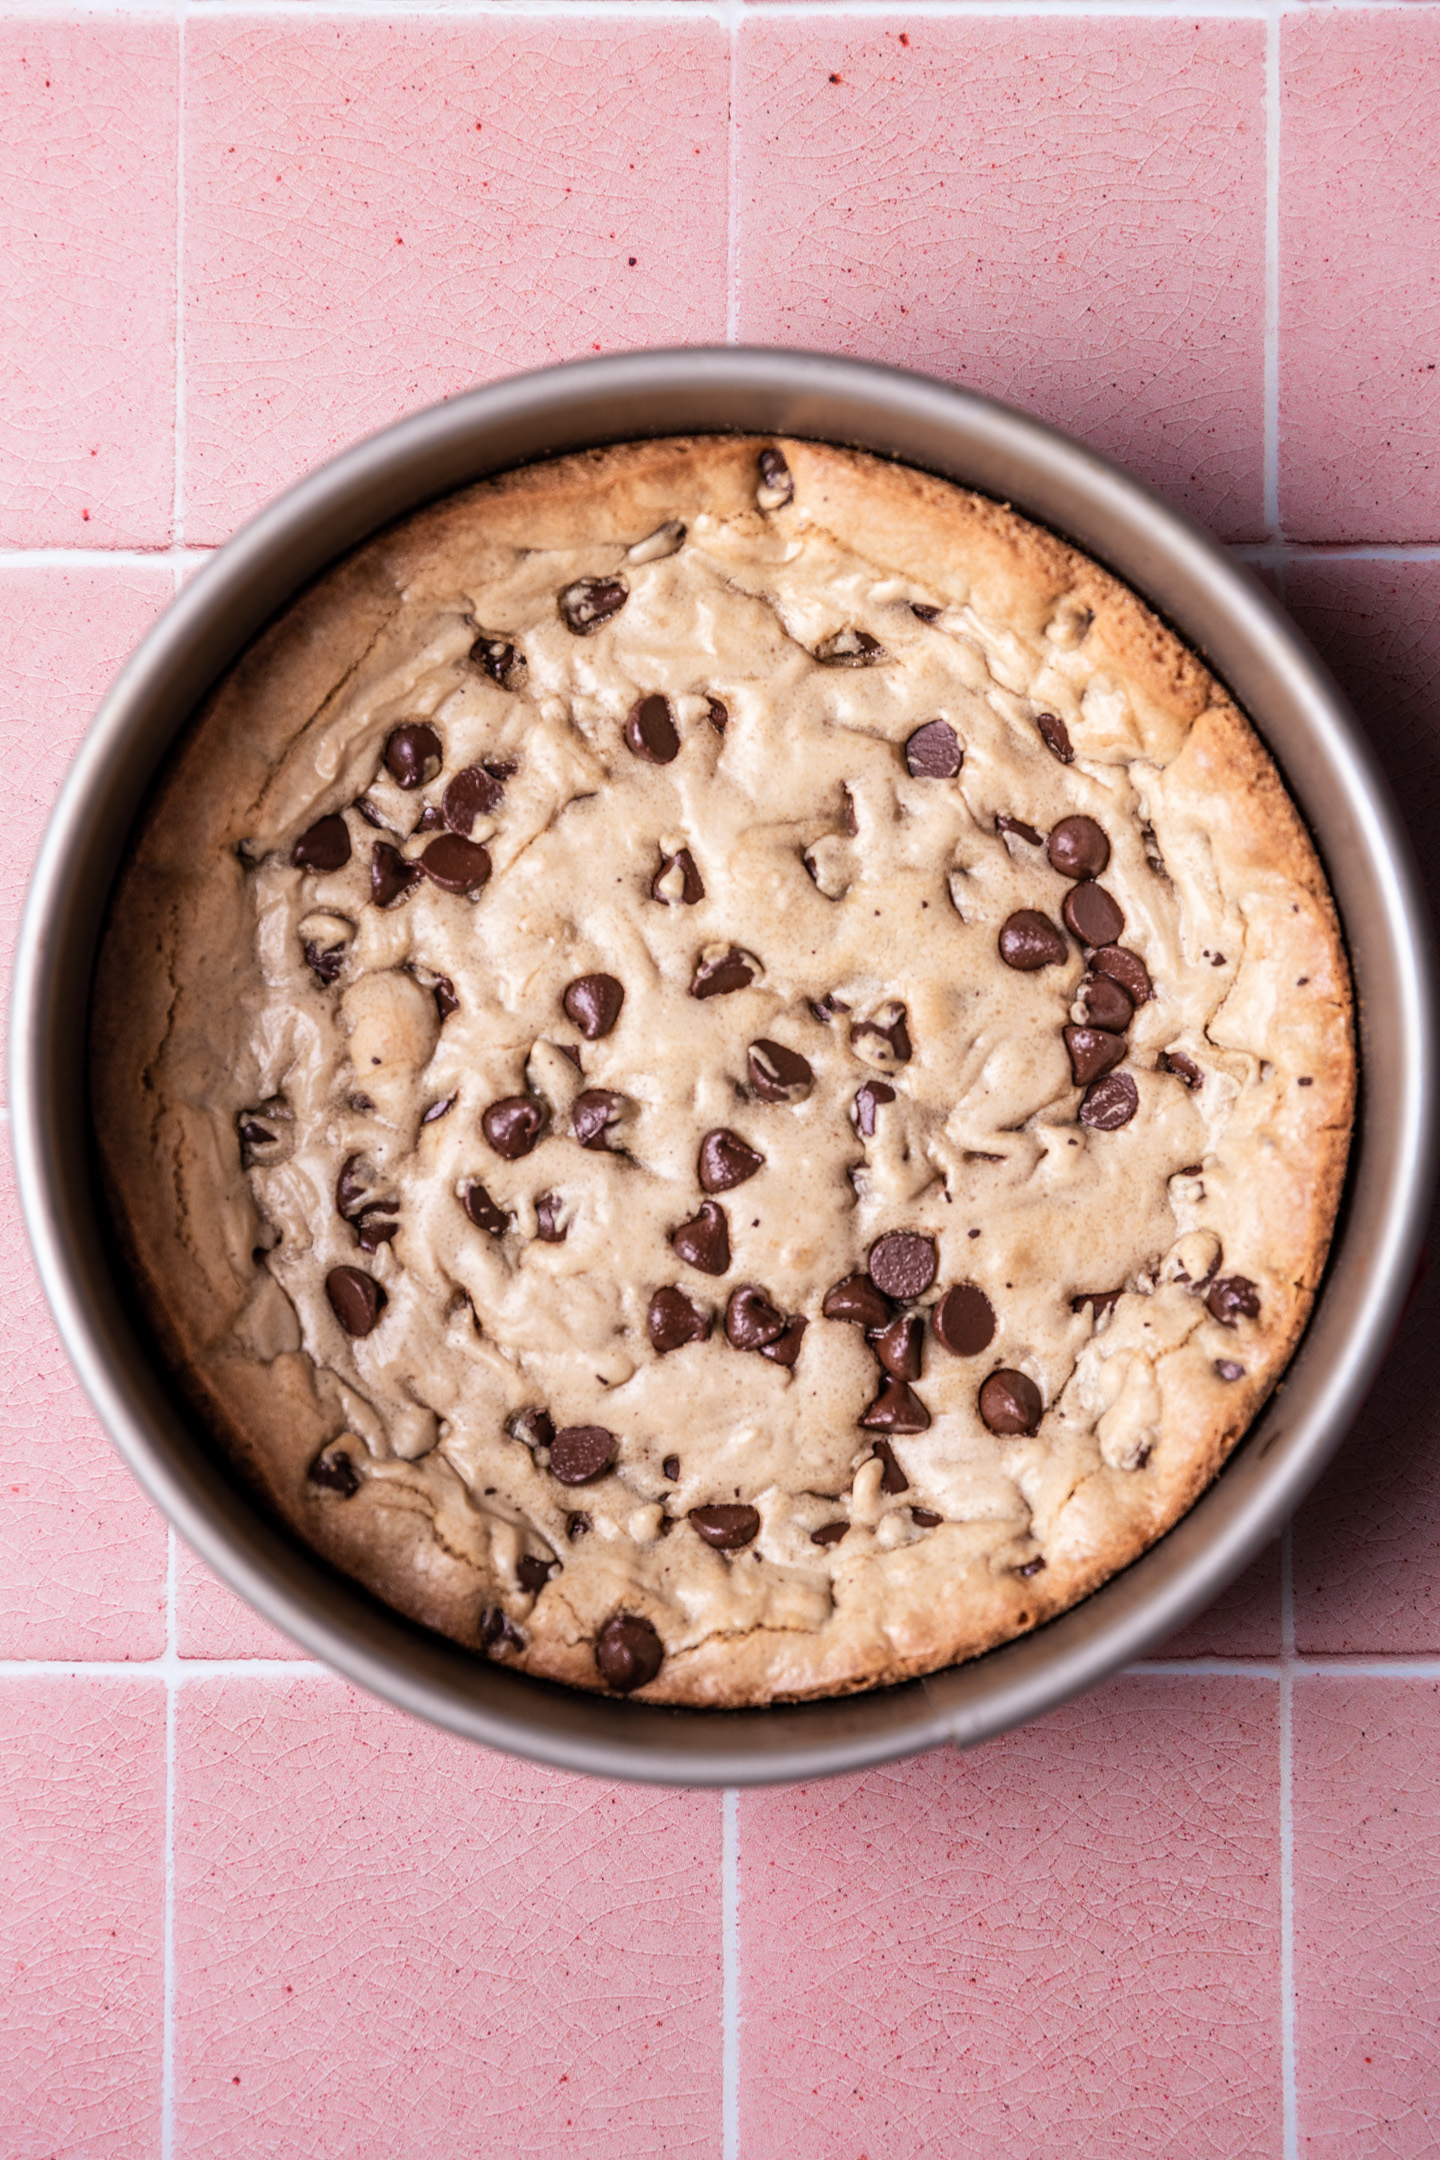 Cookie batter baked in a springform pan.